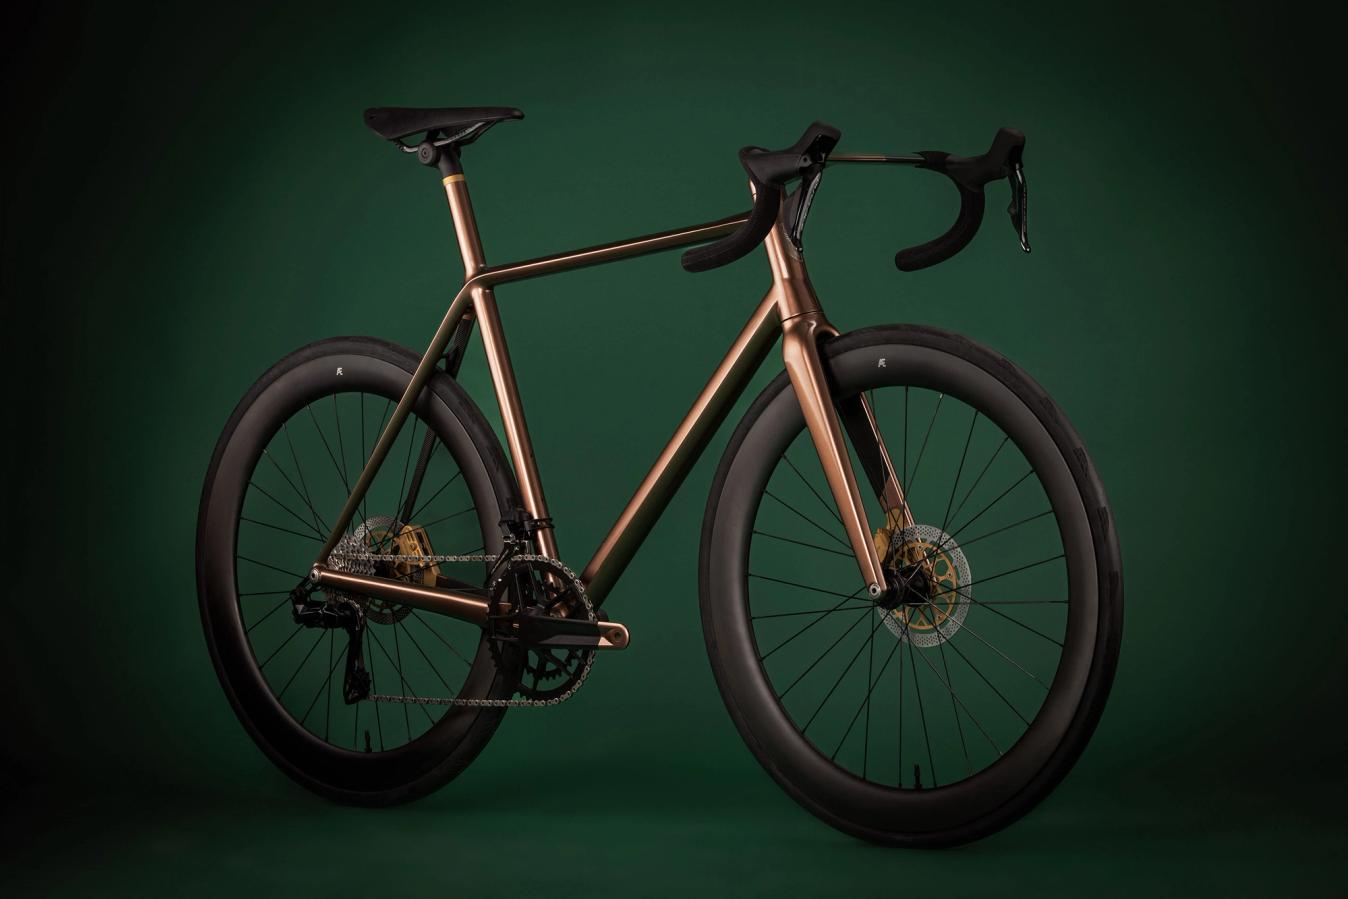 The bike is manufactured using a 3D printed titanium lugs and bonded carbon fibre tubes